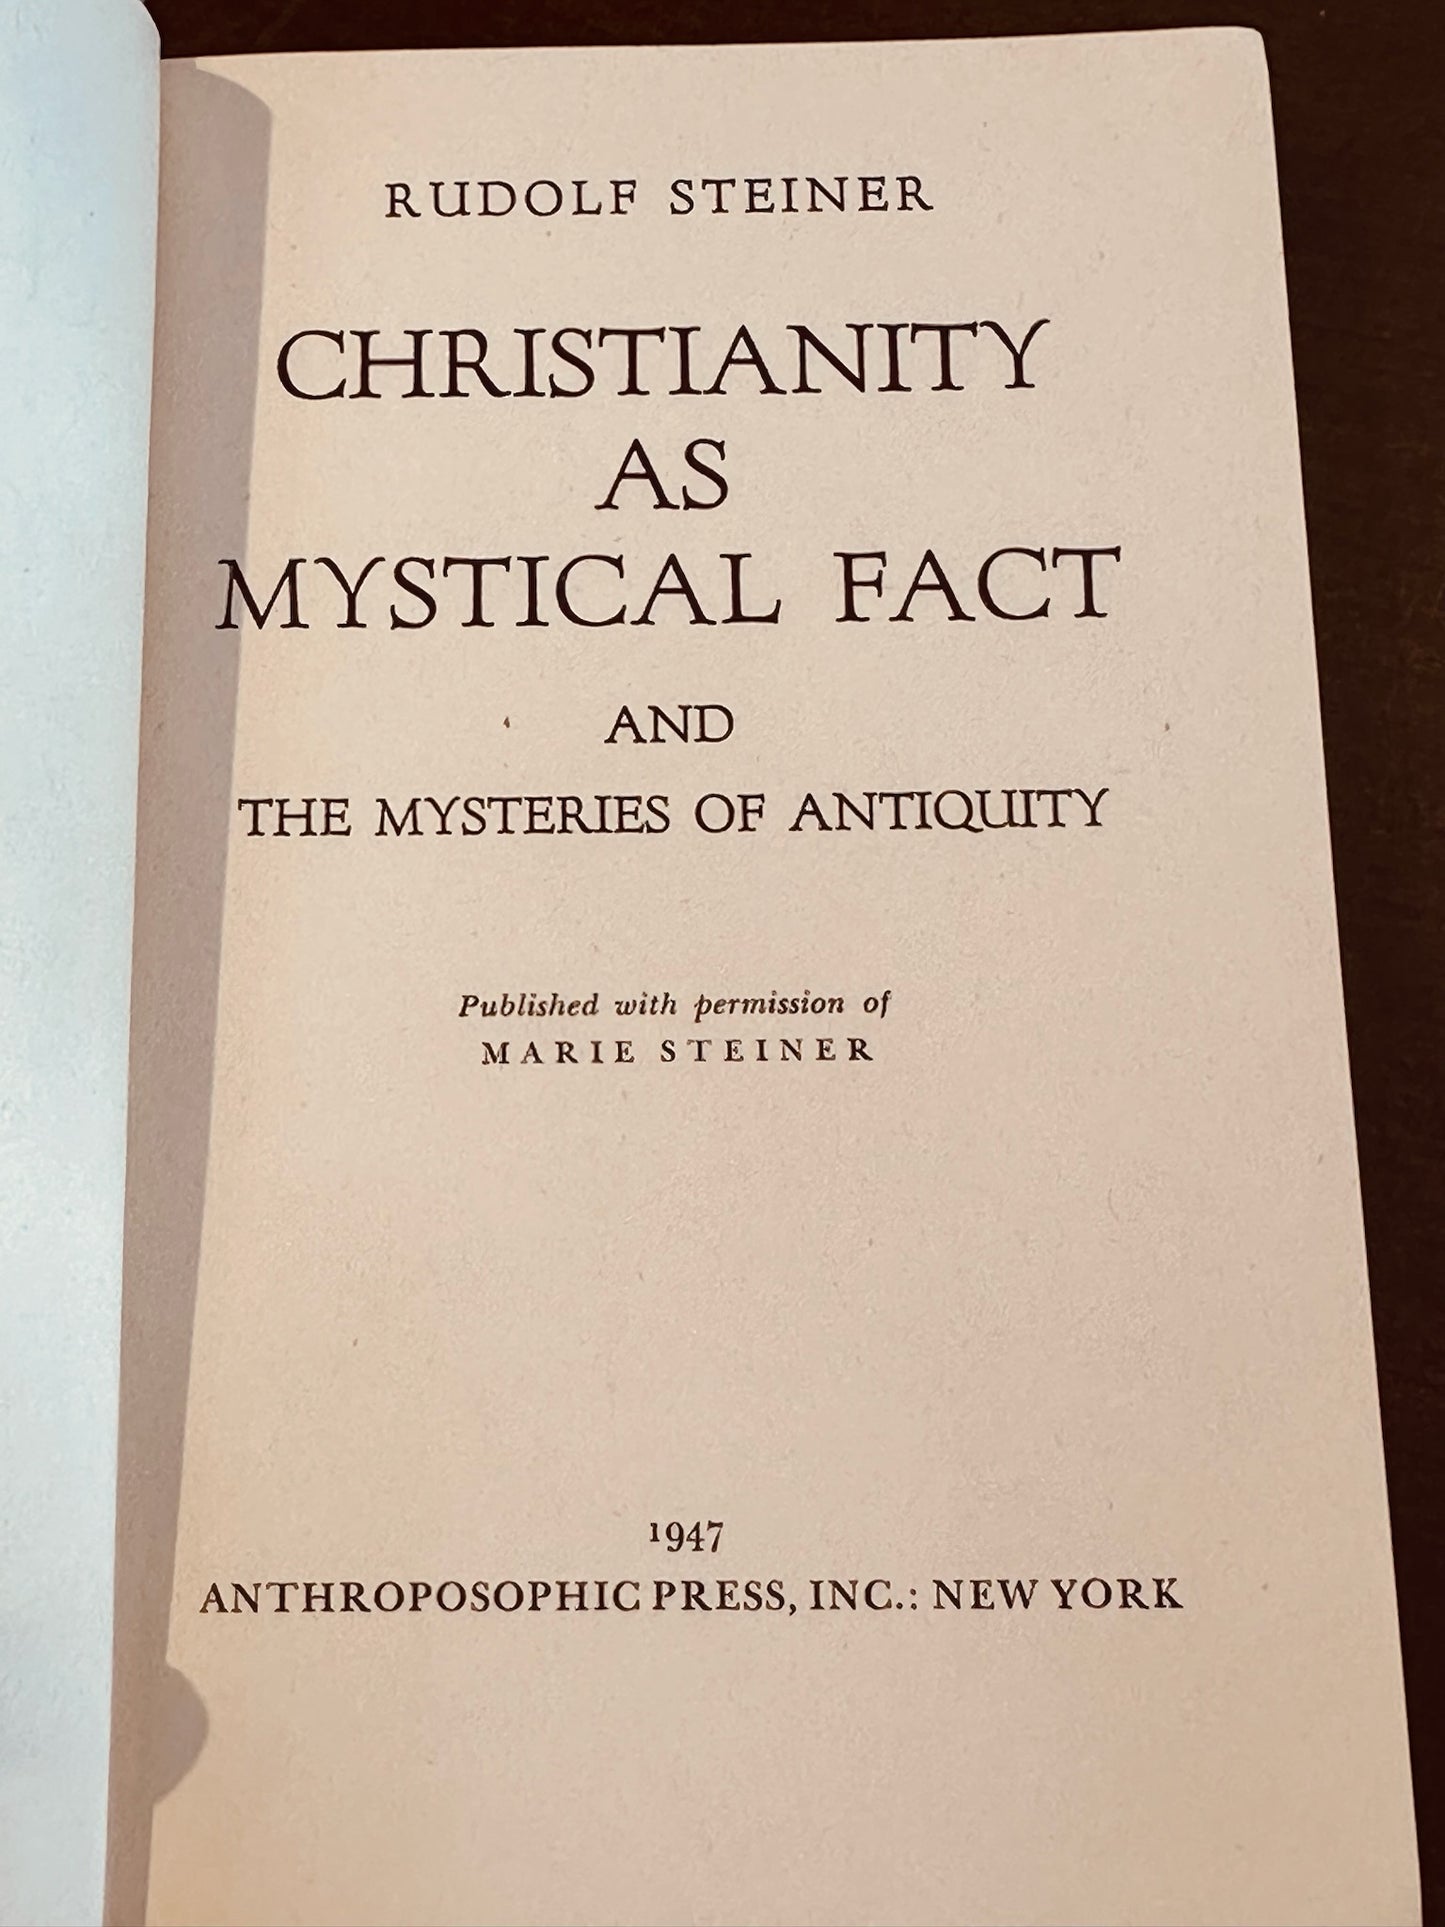 Christianity as Mystical Fact by Rudolf Steiner